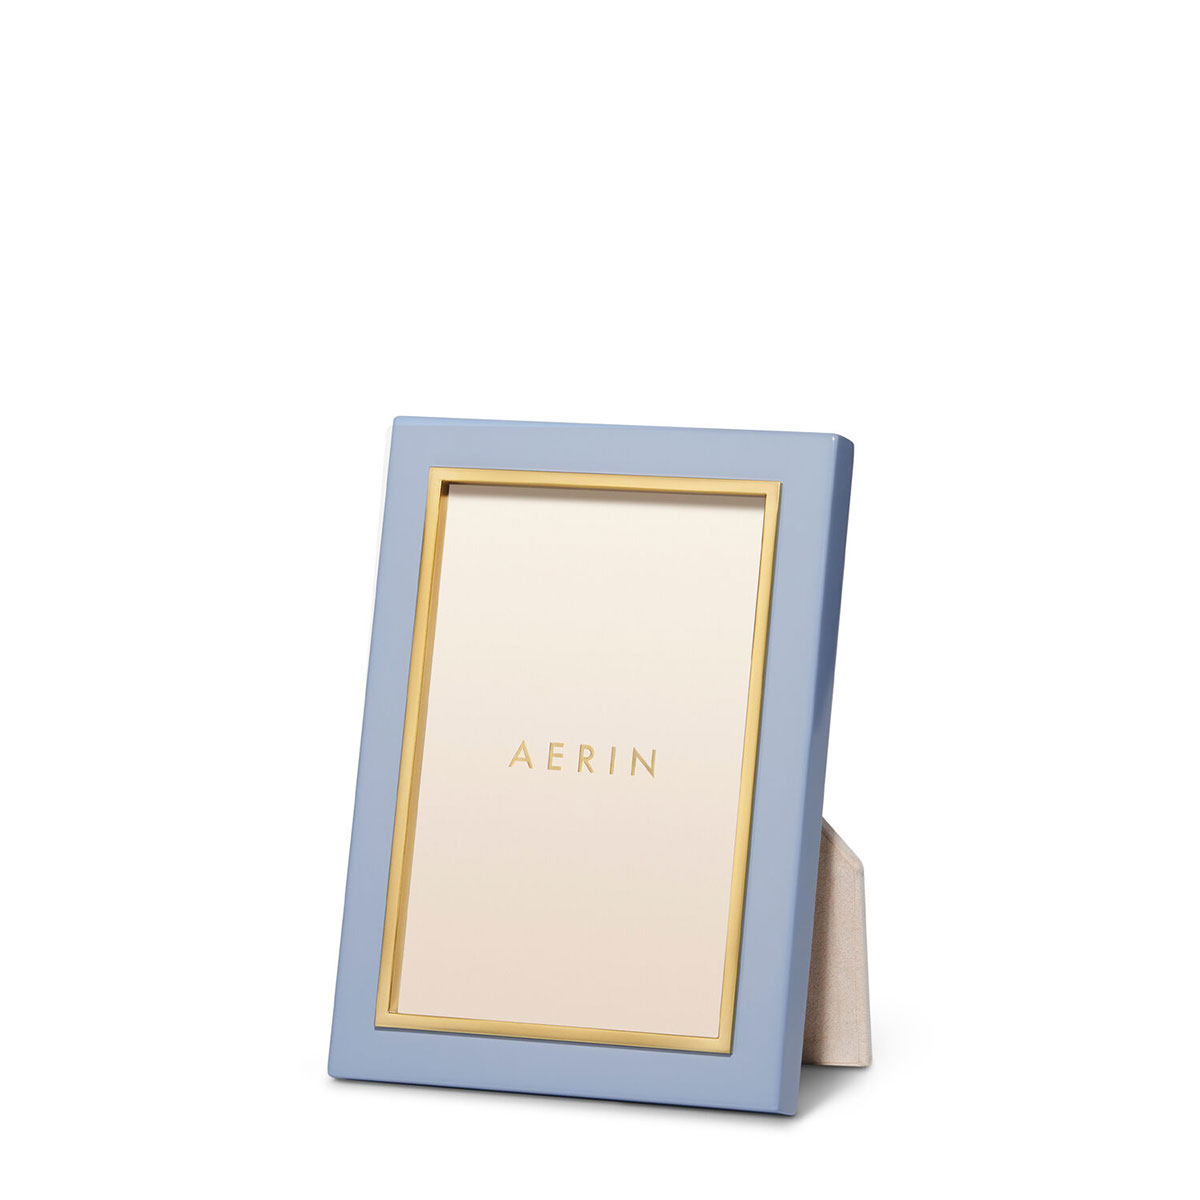 Aerin Varda Lacquer 5 x 7 Picture Frame, French Blue